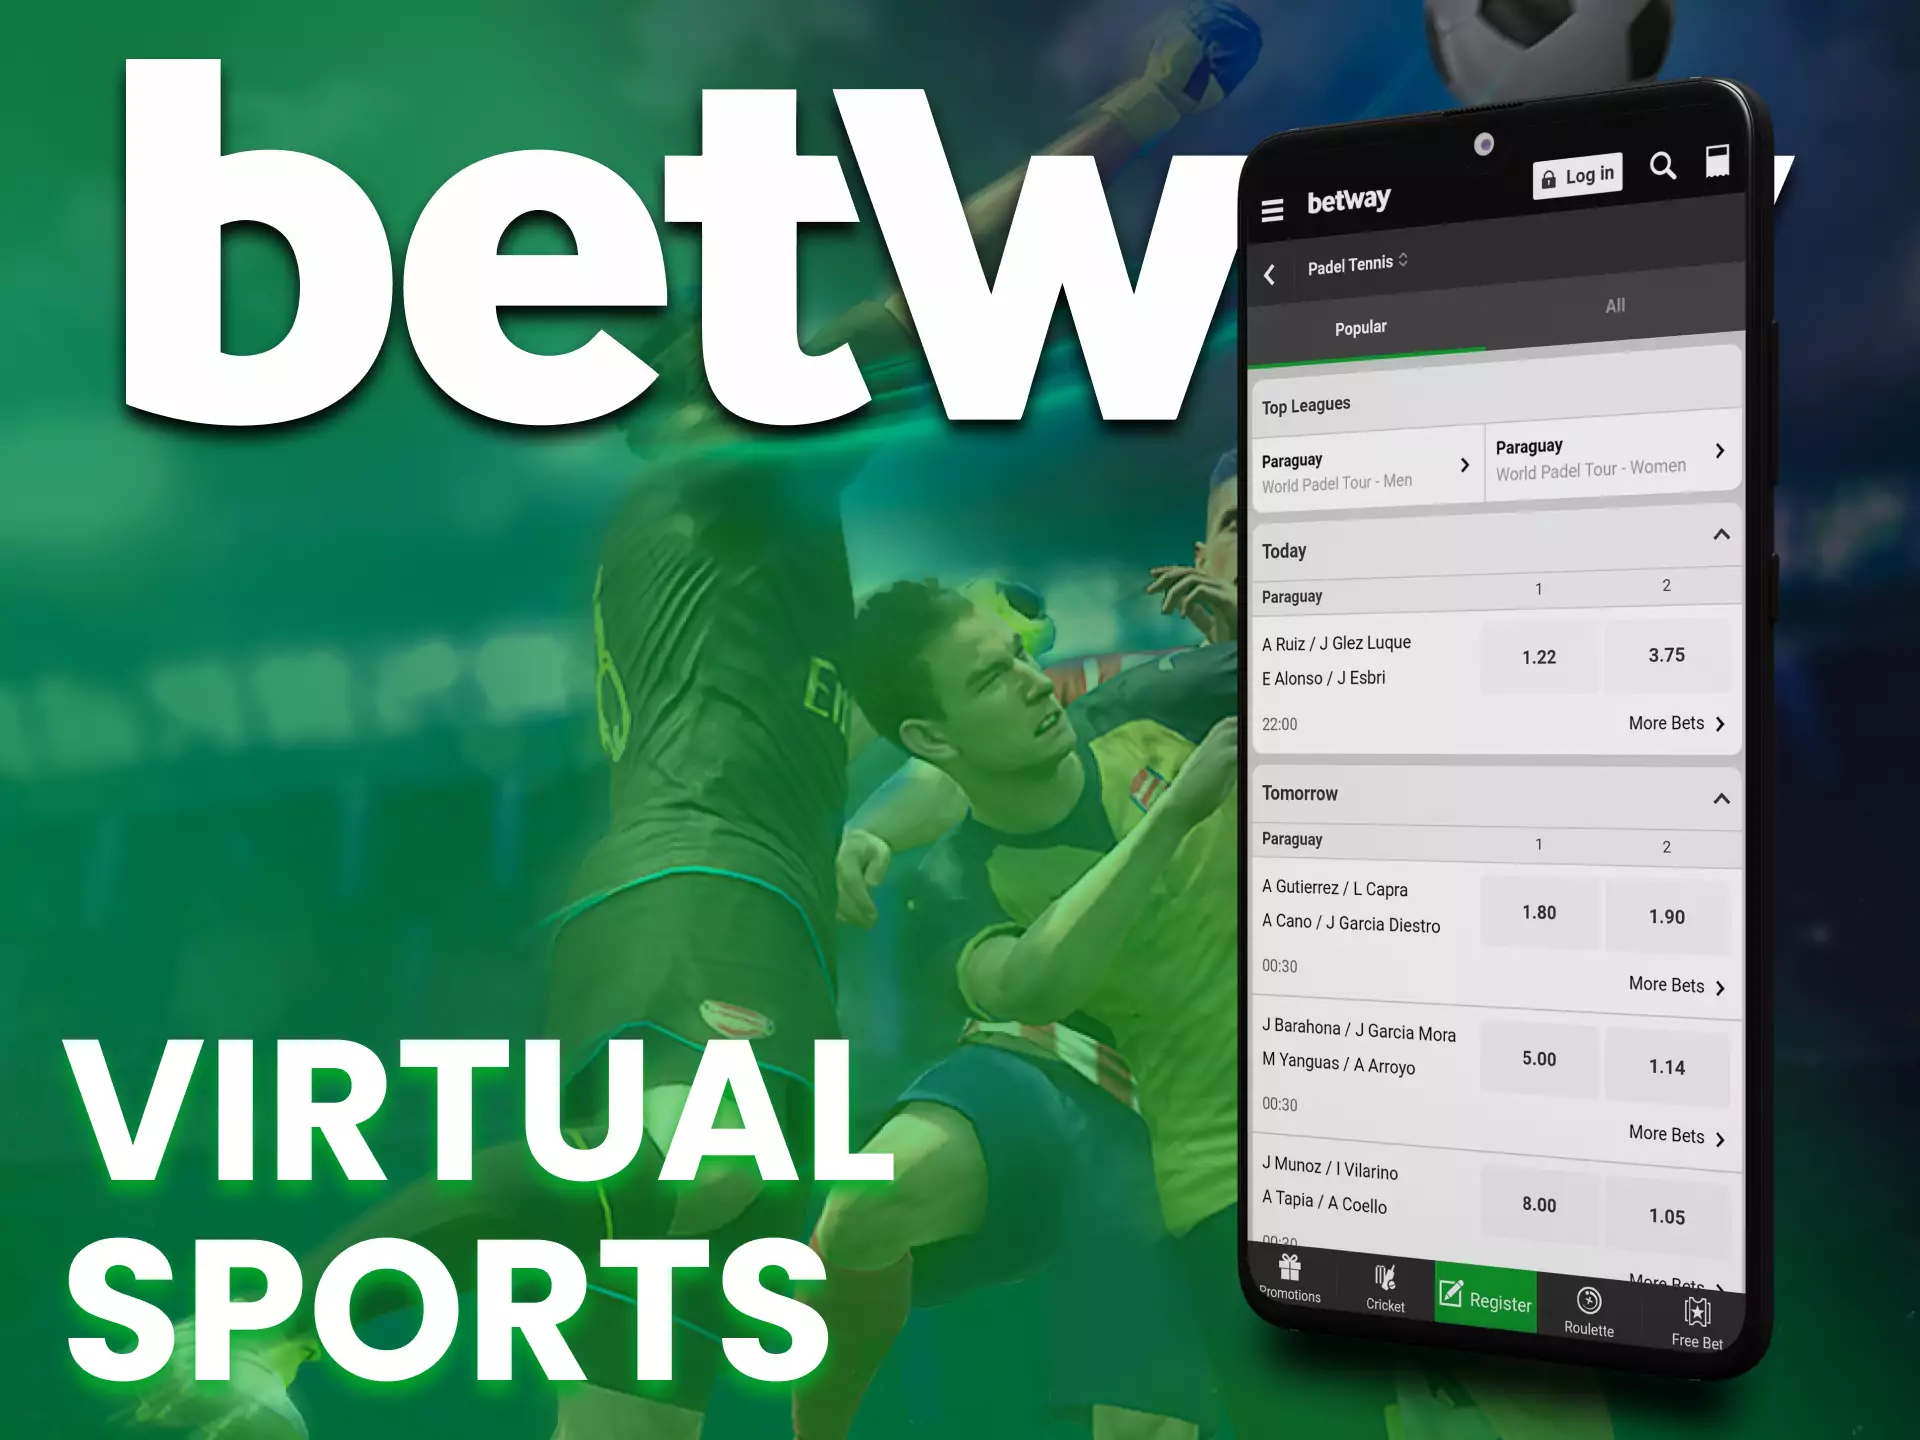 With Betway, bet on virtual sports.